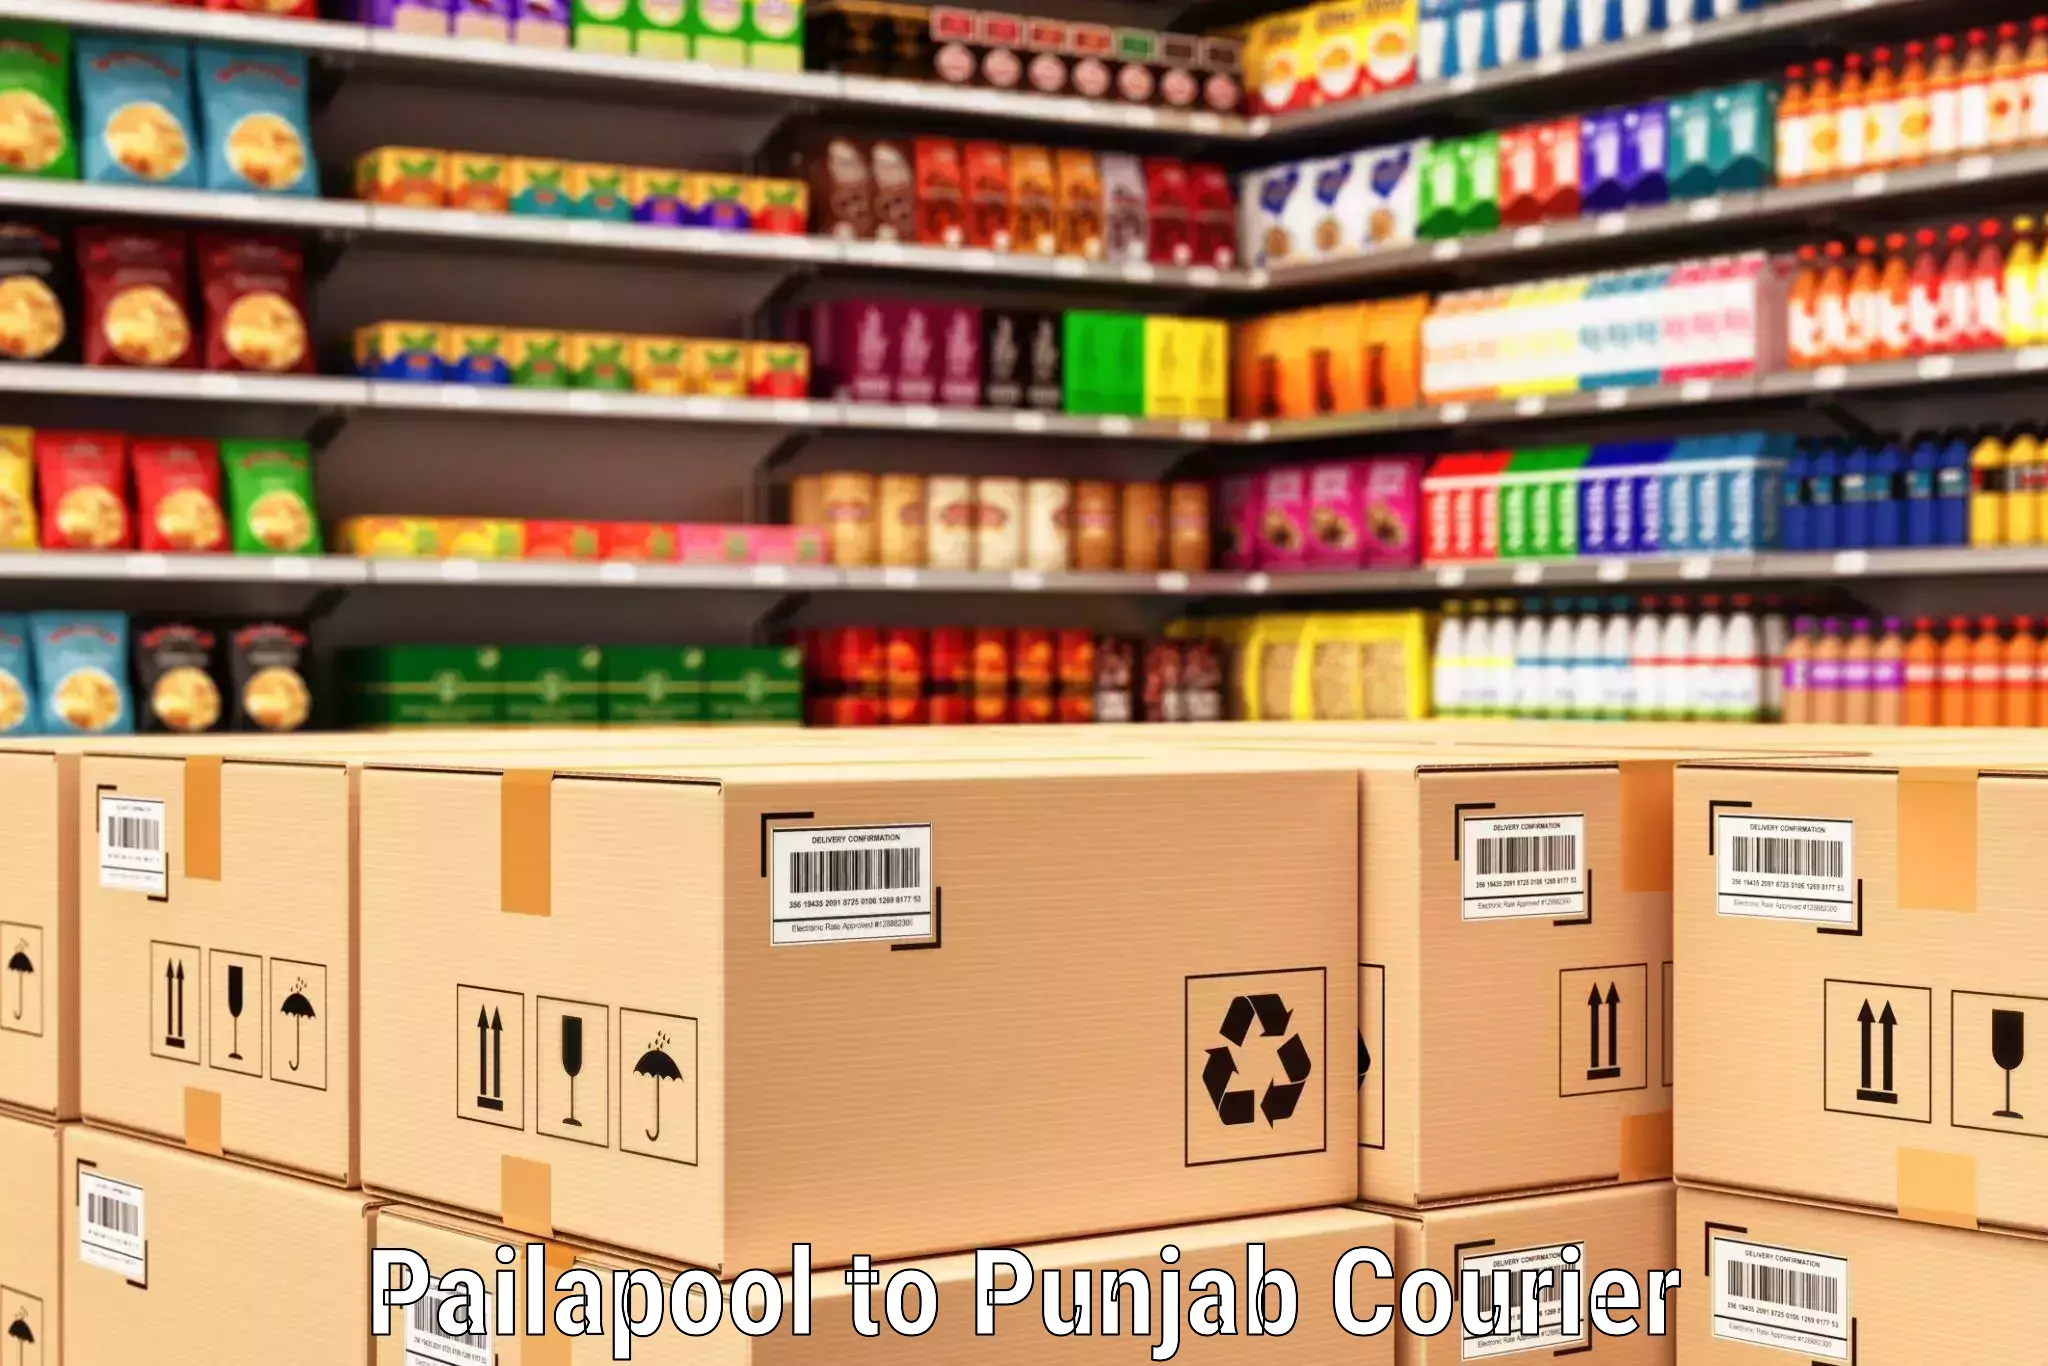 Reliable delivery network Pailapool to Punjab